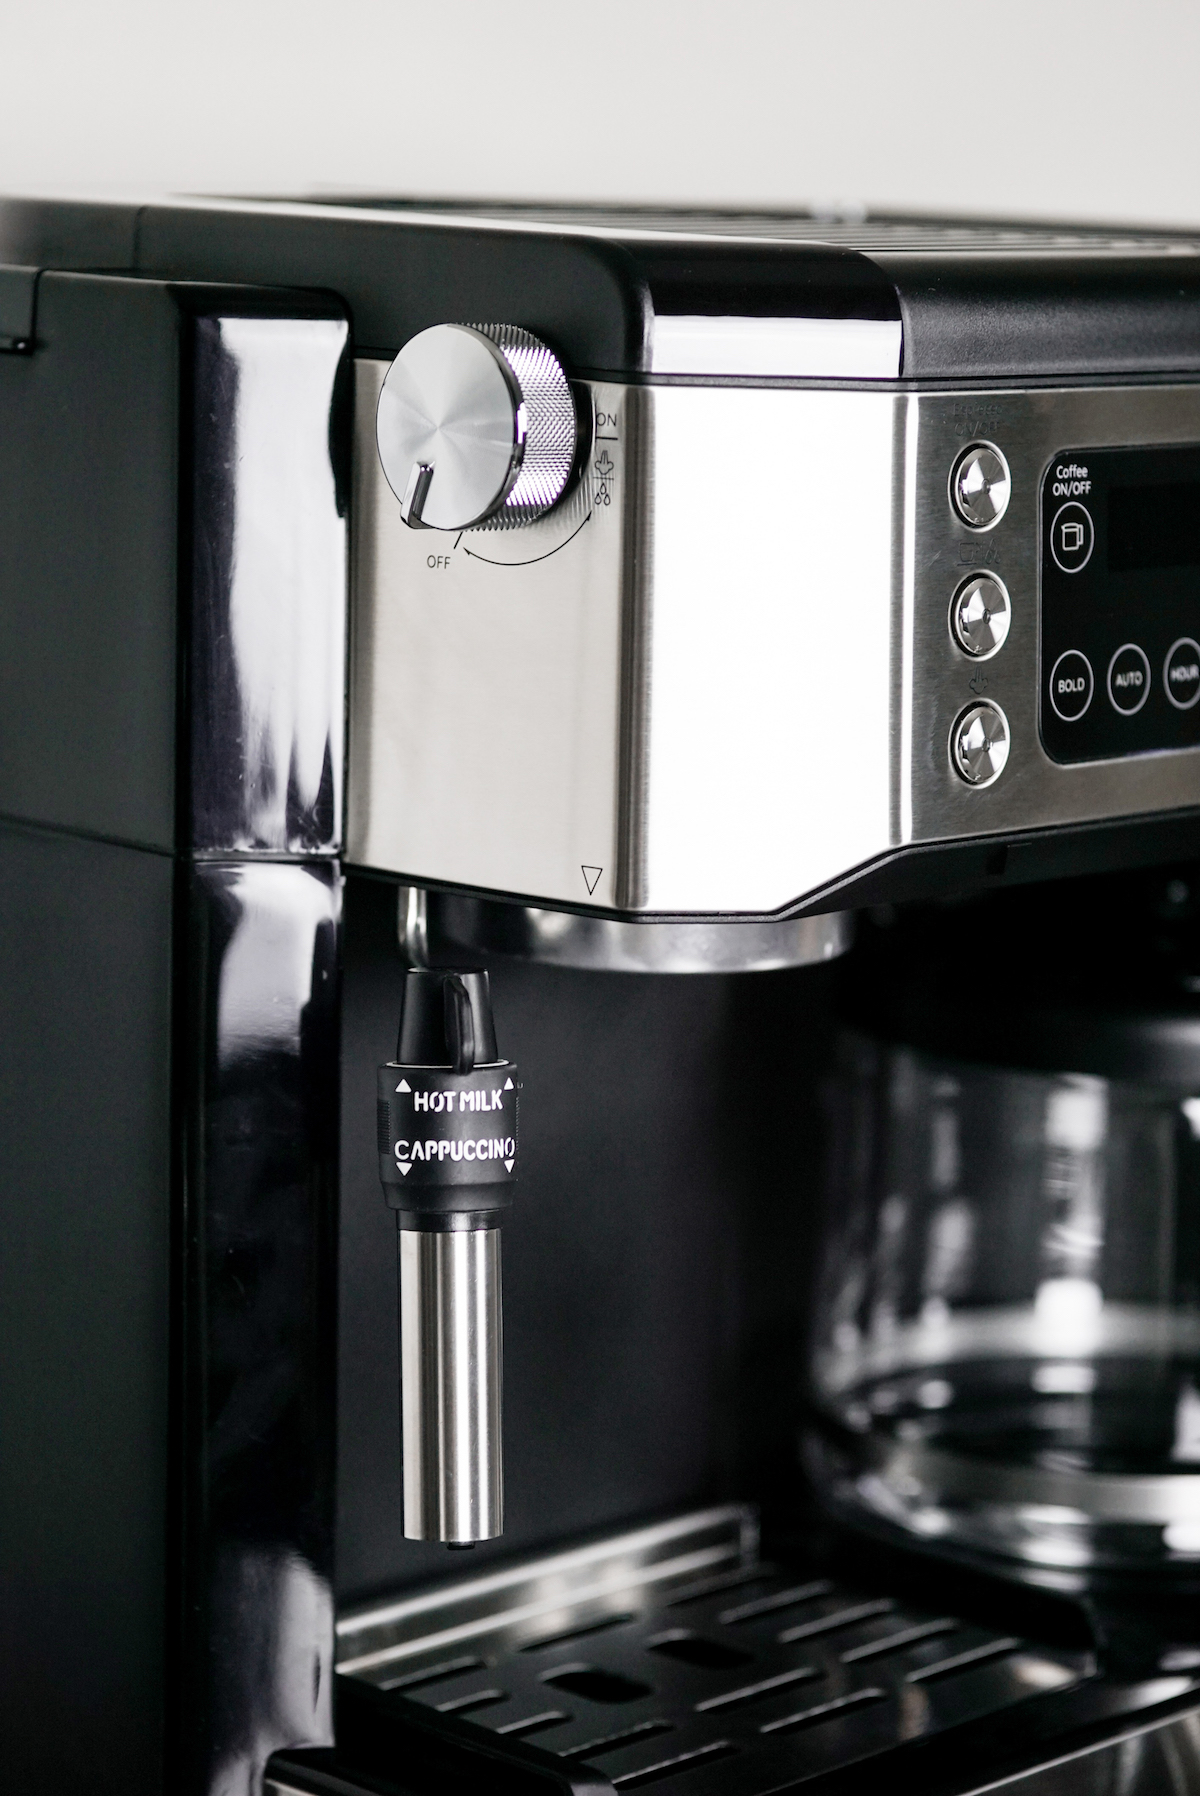 De'Longhi All-in-One Combination Coffee Maker Review